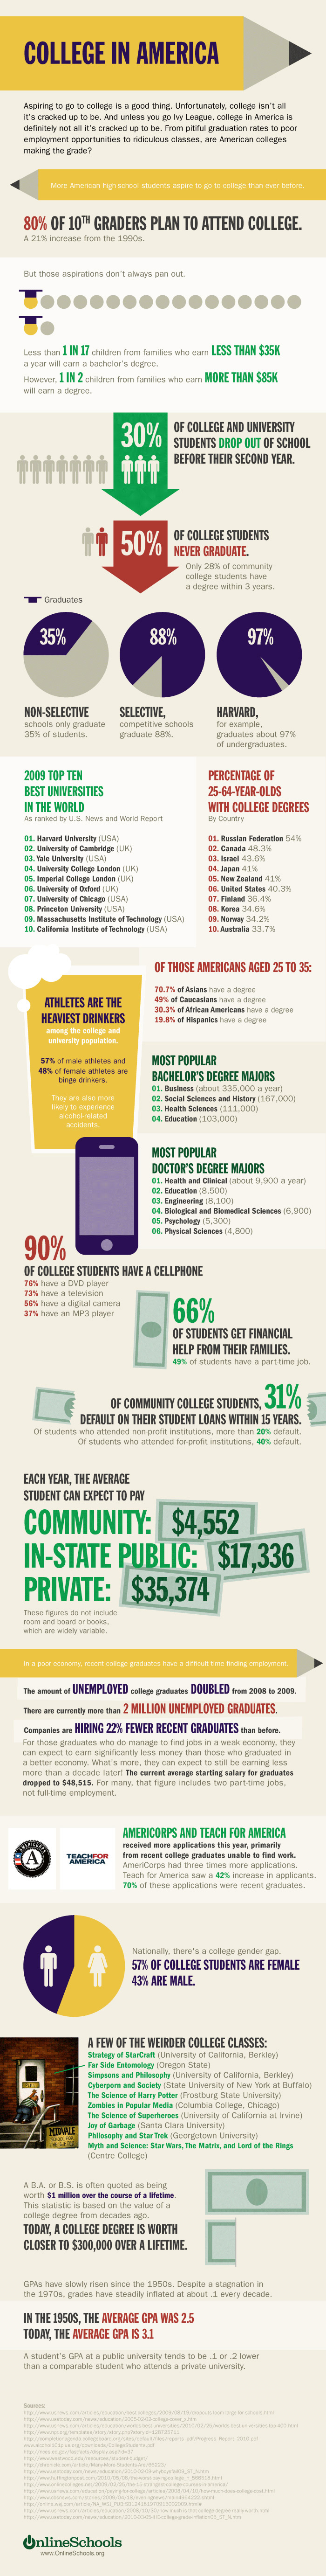 college in america infographic